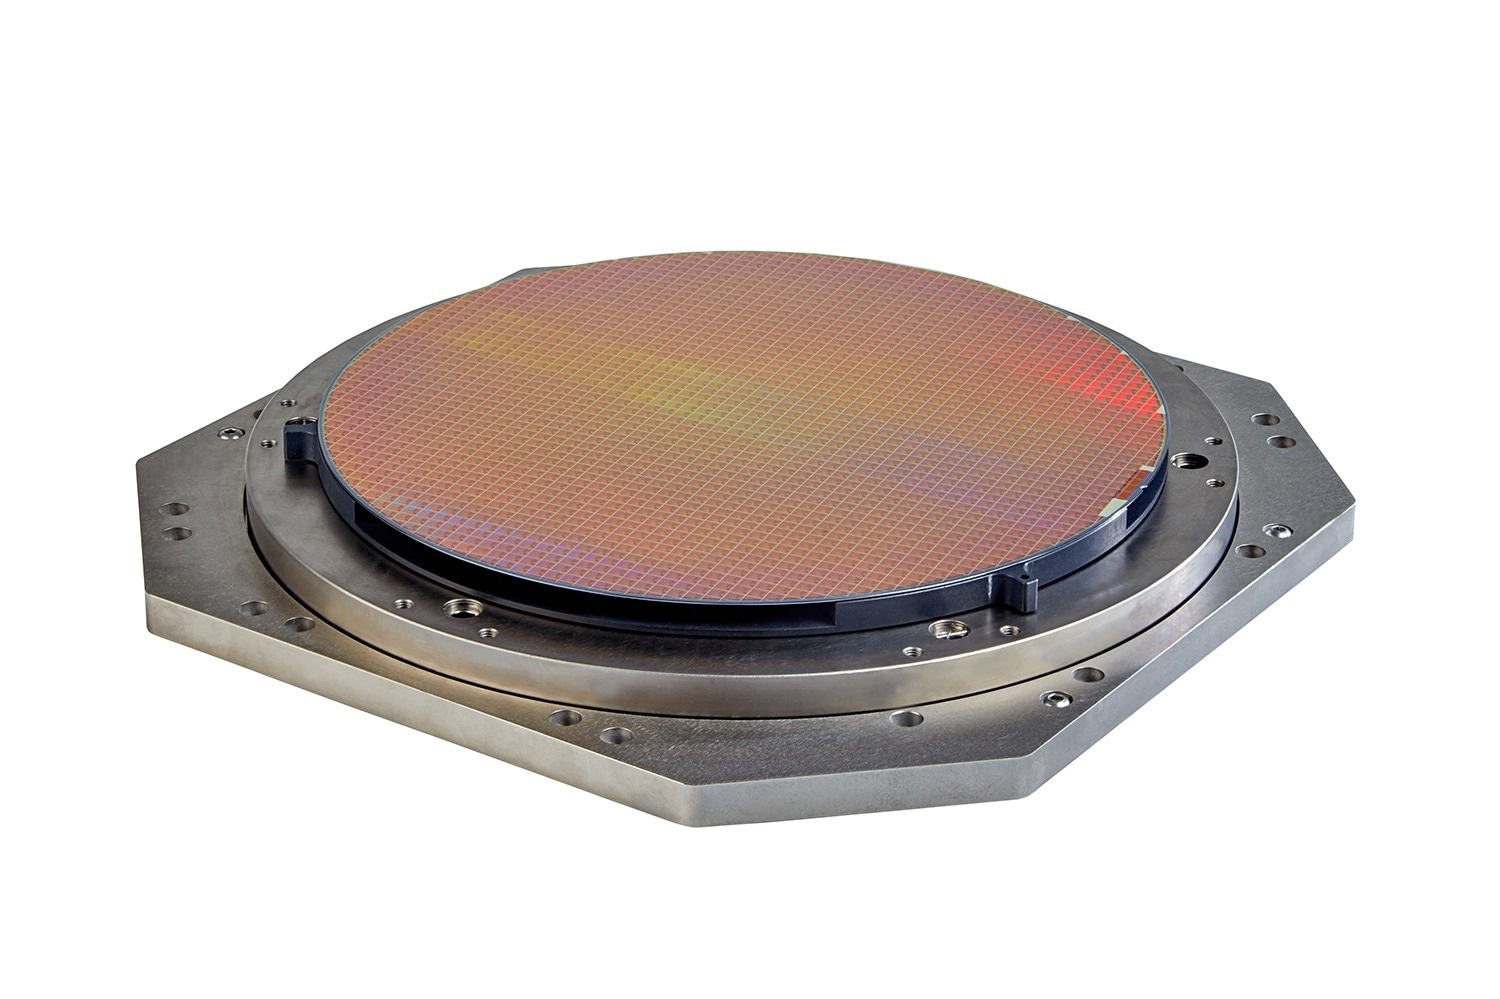 Queensgate, a brand of Prior Scientific, introduces a new high-load Piezo wafer Z stage